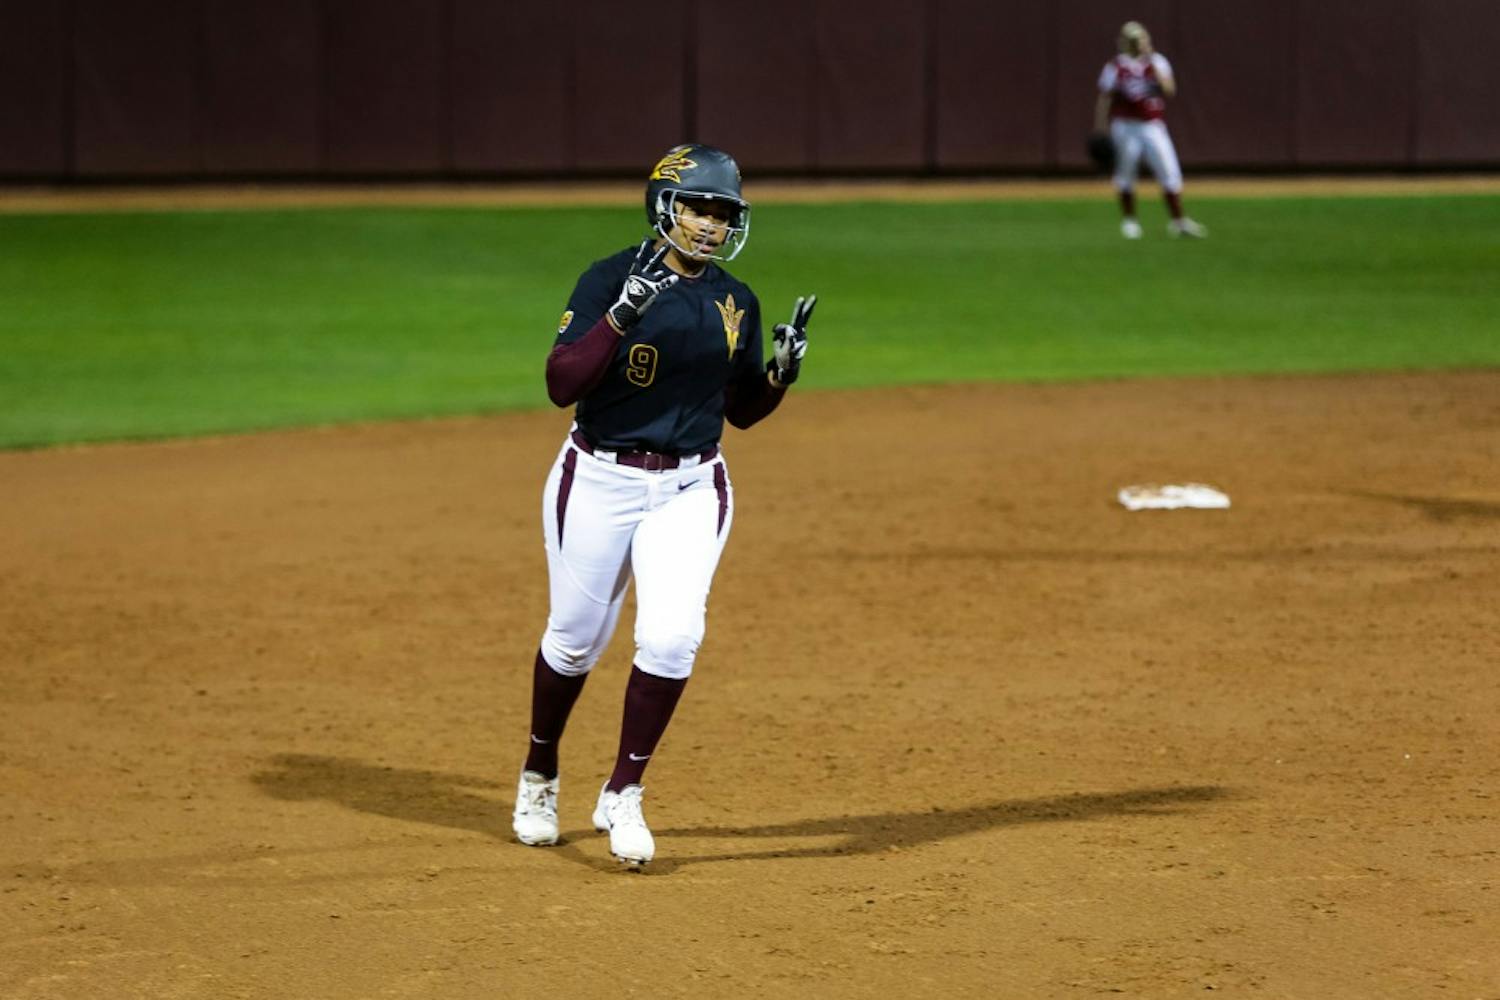 ASU senior catcher Amber Freeman throws up the pitchforks after hitting a solo home run during the ASU vs. Indiana softball game at Farrington Stadium on Feb. 7, 2015. Freeman’s pinch hitting would 
prove clutch for the Sun Devils, helping their offense to 10-2 explosion over the visiting Hoosiers.